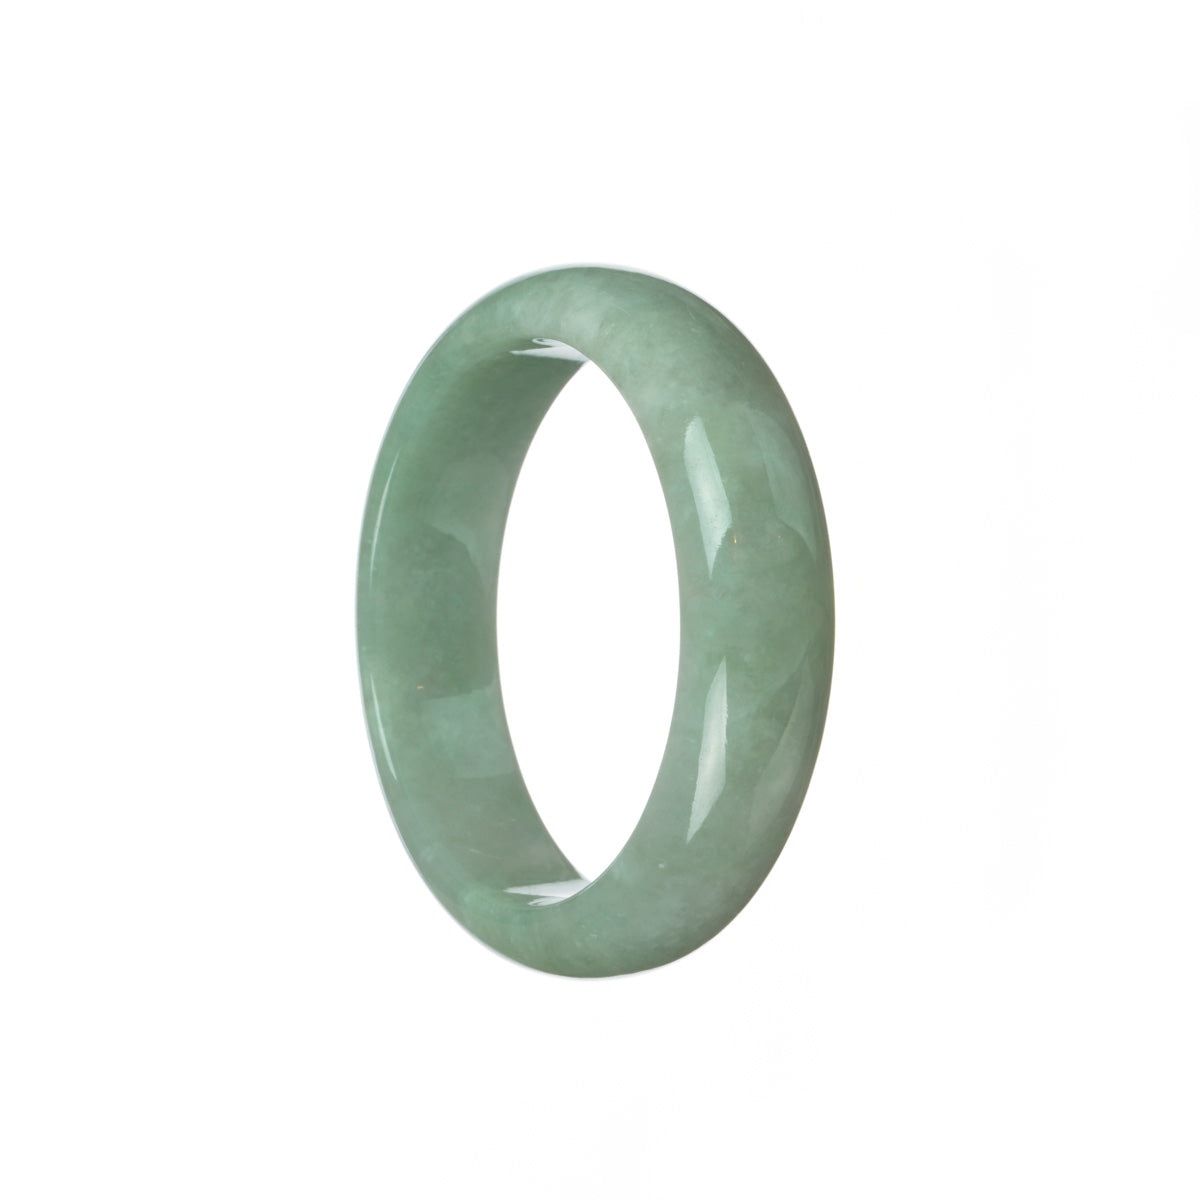 A light green traditional jade bracelet with a half moon design, measuring 53mm. Handcrafted with high-quality jade, this bracelet is a stunning piece of jewelry from MAYS GEMS.